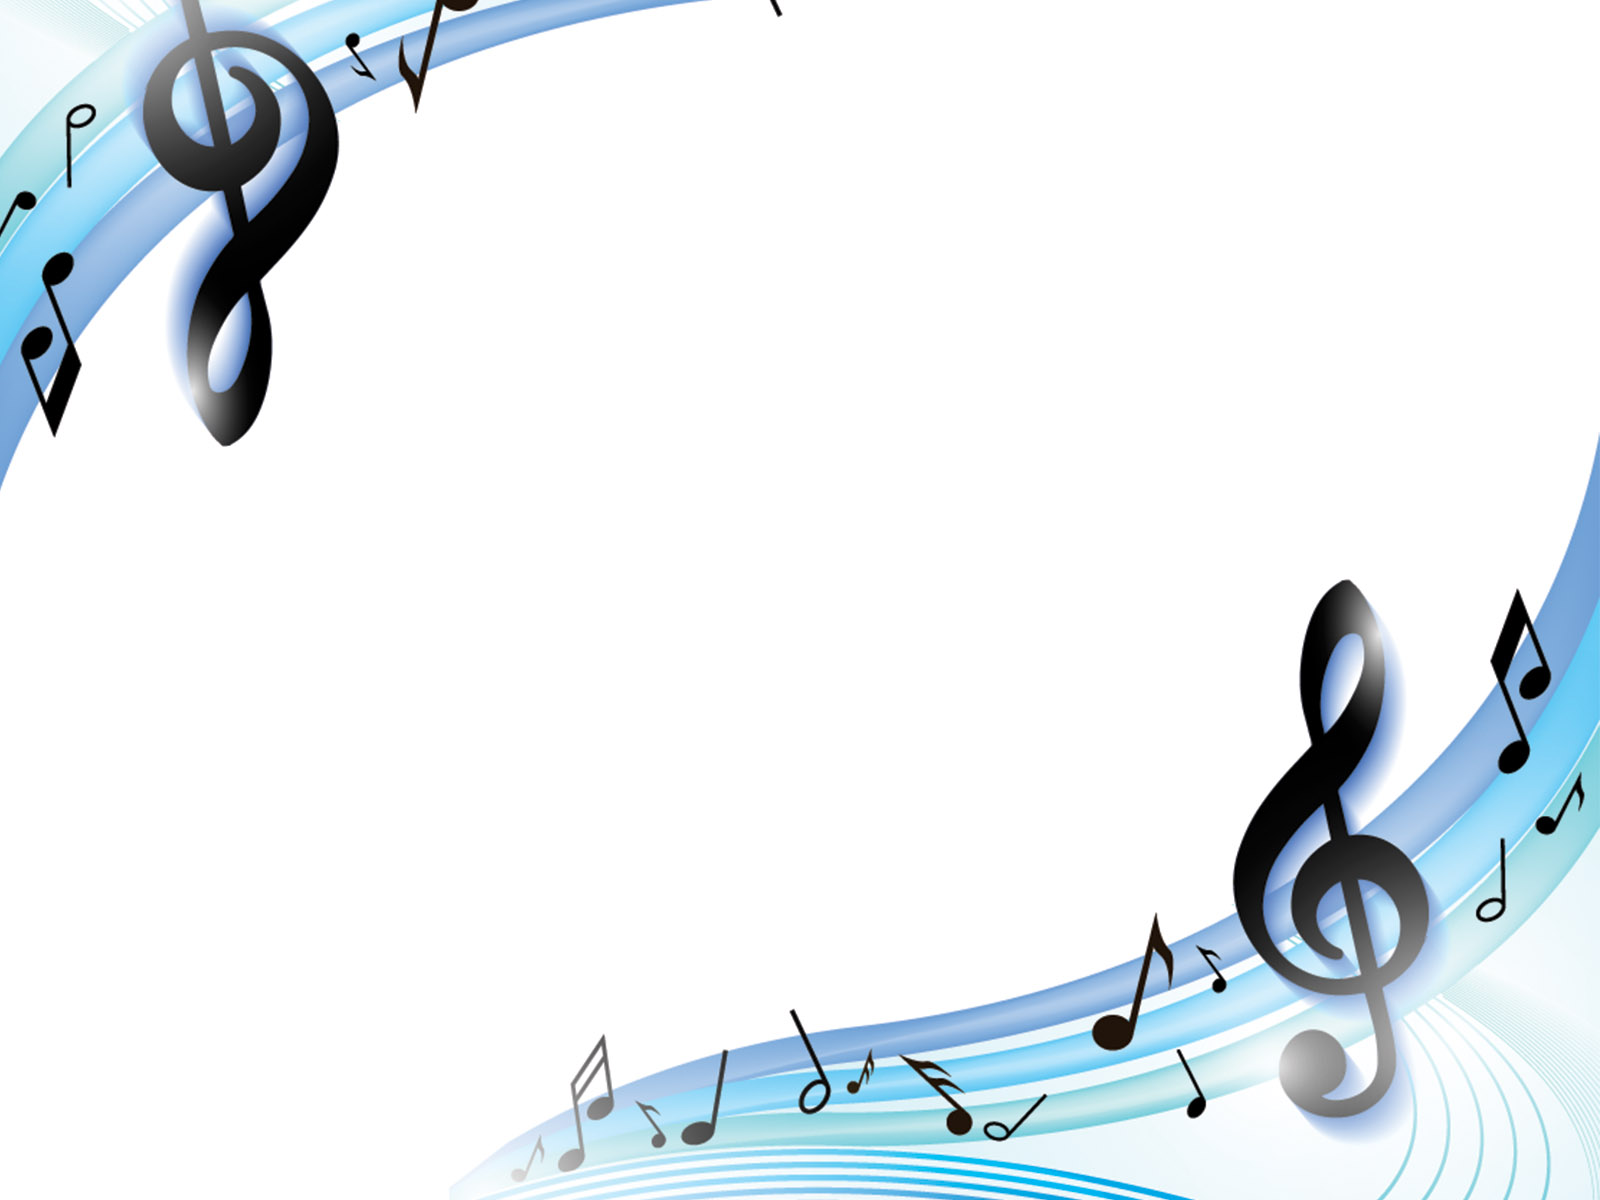 Details 200 background music for powerpoint download